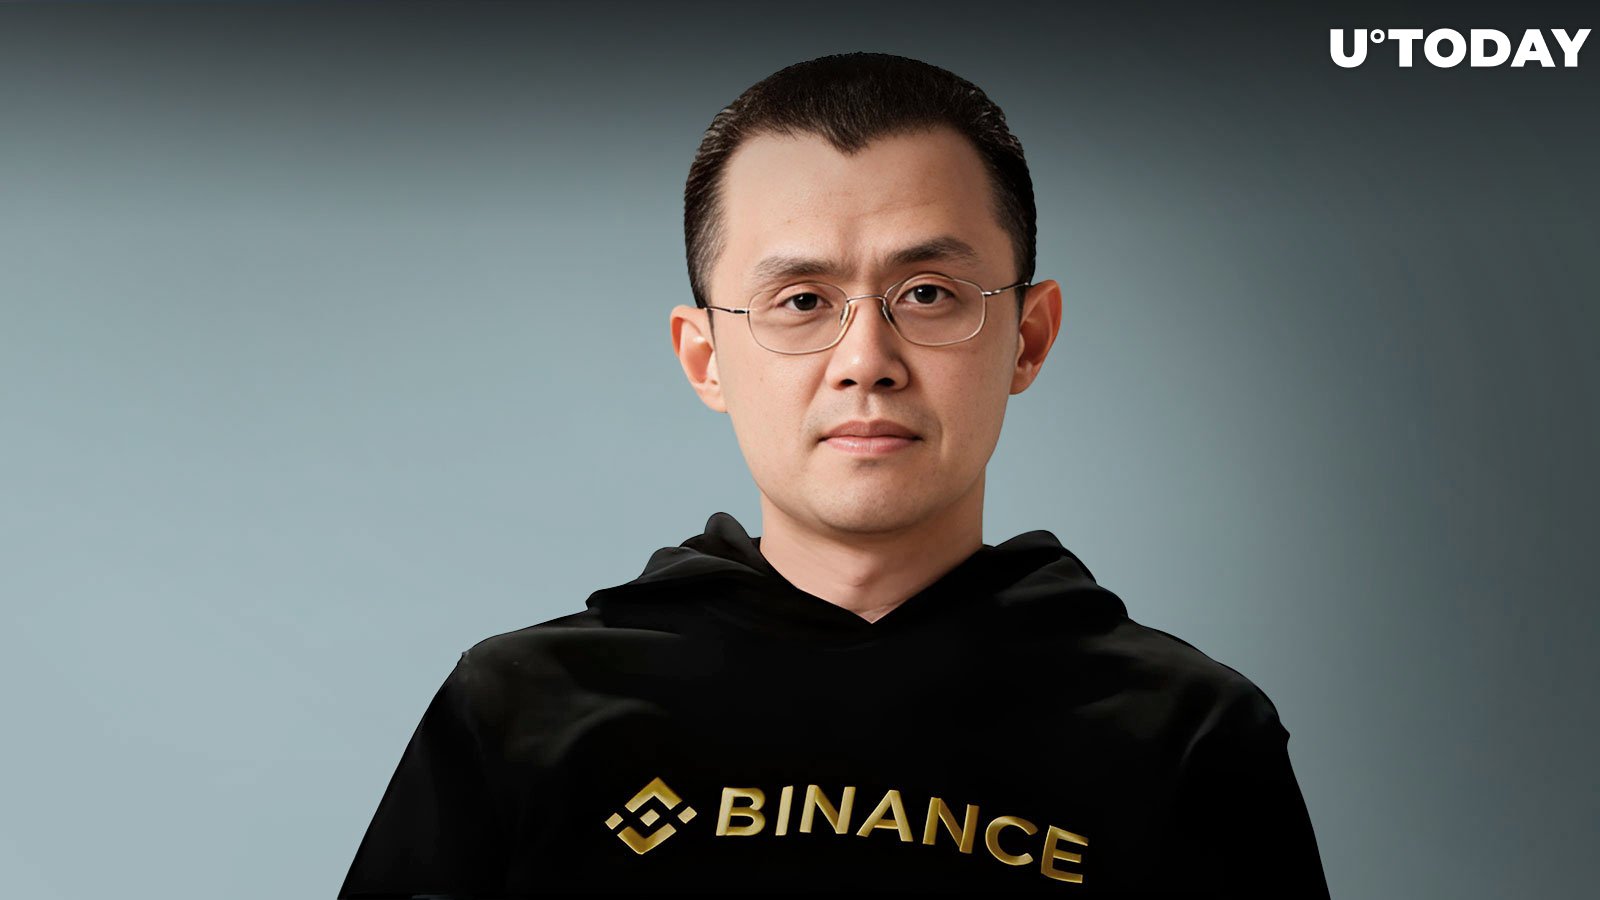 Ex-Binance CEO CZ Might Be Headed to Prison, But BNB Price Is Pumping